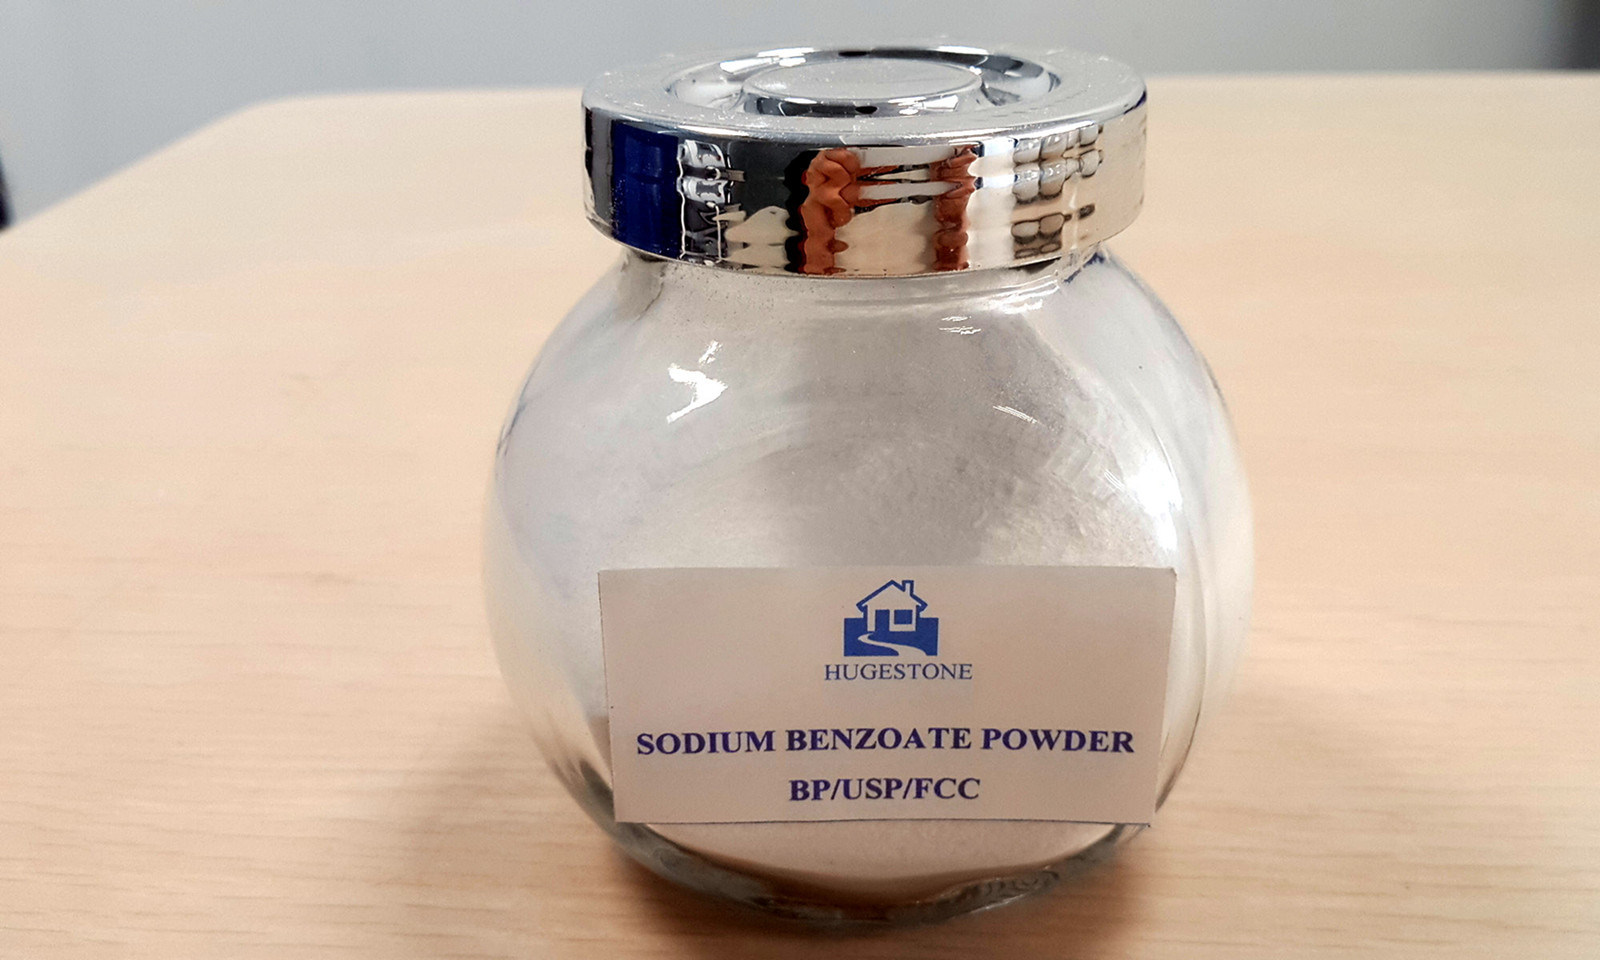 Food Additive Sodium Benzoate (NaC6H5CO2) (CAS: 532-32-1)